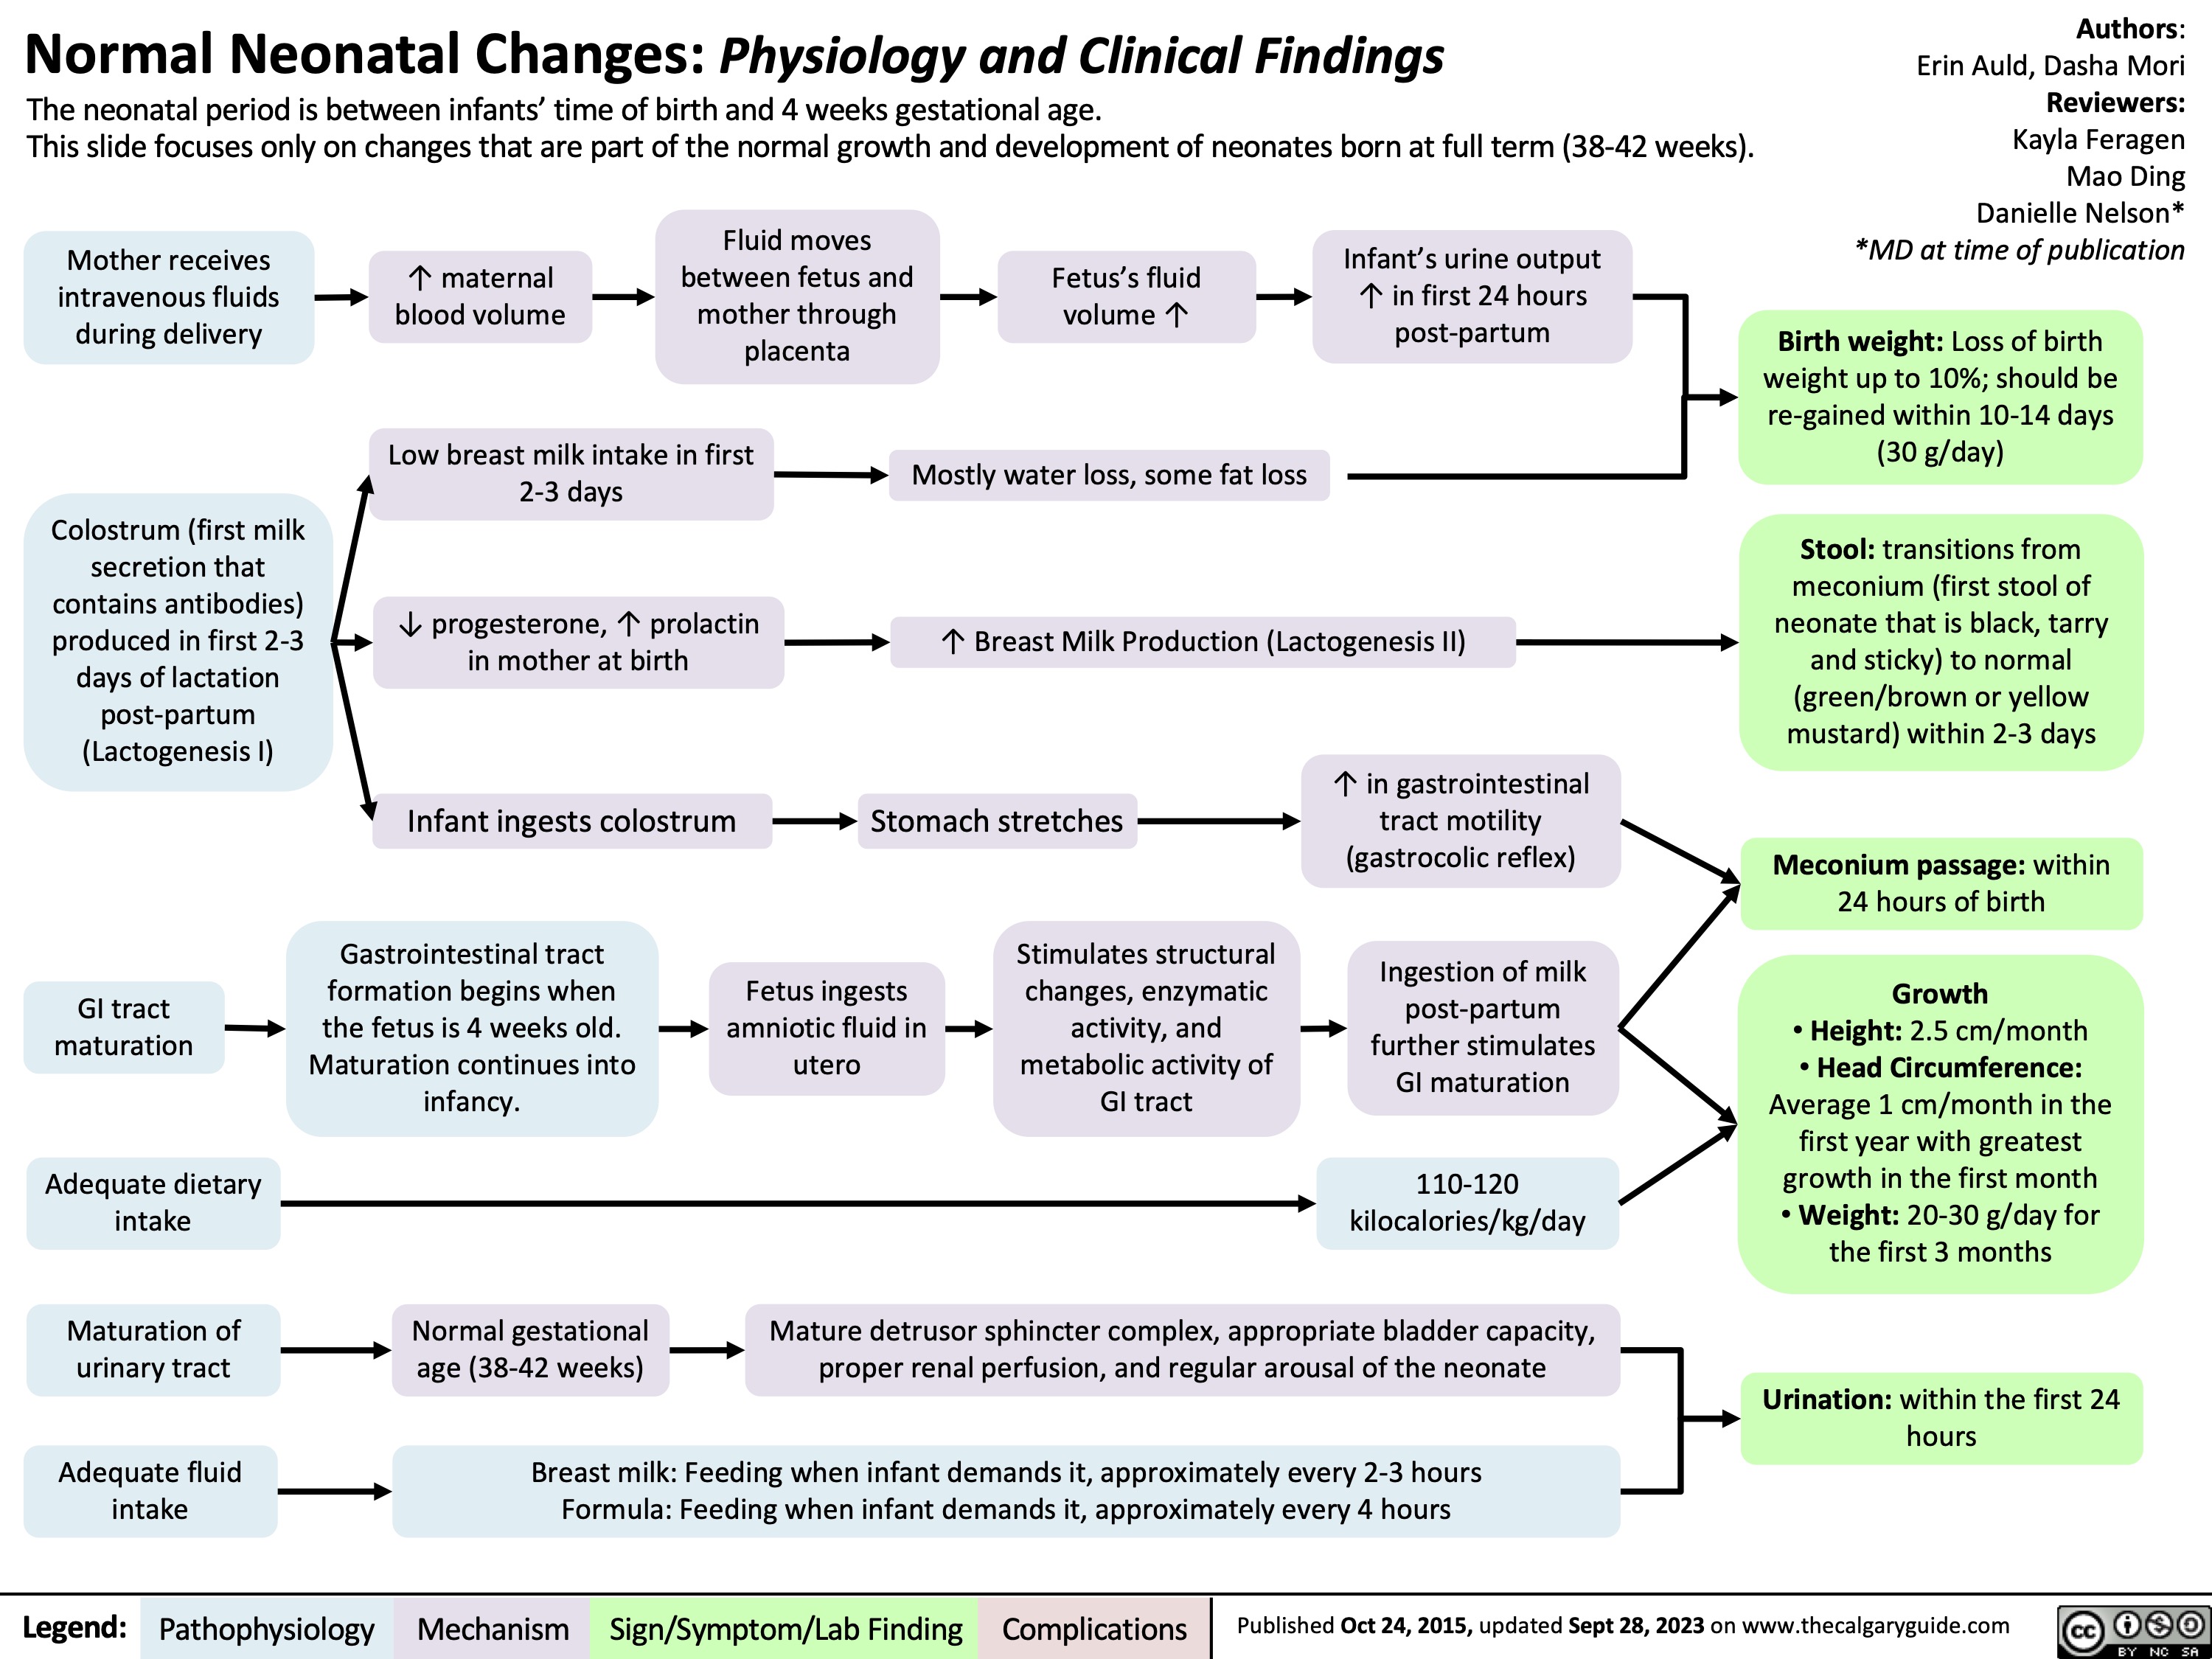 Normal Neonatal Changes: Physiology and Clinical Findings The neonatal period is between infants’ time of birth and 4 weeks gestational age.
This slide focuses only on changes that are part of the normal growth and development of neonates born at full term (38-42 weeks).
Authors: Erin Auld, Dasha Mori Reviewers: Kayla Feragen Mao Ding Danielle Nelson* *MD at time of publication
Birth weight: Loss of birth weight up to 10%; should be re-gained within 10-14 days (30 g/day)
Stool: transitions from meconium (first stool of neonate that is black, tarry and sticky) to normal (green/brown or yellow mustard) within 2-3 days
Meconium passage: within 24 hours of birth
Growth
• Height: 2.5 cm/month
• Head Circumference: Average 1 cm/month in the first year with greatest growth in the first month • Weight: 20-30 g/day for the first 3 months
Urination: within the first 24 hours
   Mother receives intravenous fluids during delivery
Colostrum (first milk secretion that contains antibodies) produced in first 2-3 days of lactation post-partum (Lactogenesis I)
GI tract maturation
Adequate dietary intake
Maturation of urinary tract
Adequate fluid intake
↑ maternal blood volume
Fluid moves between fetus and mother through placenta
Fetus’s fluid volume ↑
Infant’s urine output ↑ in first 24 hours post-partum
     Low breast milk intake in first 2-3 days
↓ progesterone, ↑ prolactin in mother at birth
Infant ingests colostrum
Mostly water loss, some fat loss
       ↑ Breast Milk Production (Lactogenesis II)
     Stomach stretches
↑ in gastrointestinal tract motility (gastrocolic reflex)
Ingestion of milk post-partum further stimulates GI maturation
110-120 kilocalories/kg/day
      Gastrointestinal tract formation begins when the fetus is 4 weeks old. Maturation continues into infancy.
Normal gestational age (38-42 weeks)
Fetus ingests amniotic fluid in utero
Stimulates structural changes, enzymatic activity, and metabolic activity of GI tract
           Mature detrusor sphincter complex, appropriate bladder capacity, proper renal perfusion, and regular arousal of the neonate
      Breast milk: Feeding when infant demands it, approximately every 2-3 hours Formula: Feeding when infant demands it, approximately every 4 hours
  Legend:
 Pathophysiology
 Mechanism
Sign/Symptom/Lab Finding
 Complications
 Published Oct 24, 2015, updated Sept 28, 2023 on www.thecalgaryguide.com
  